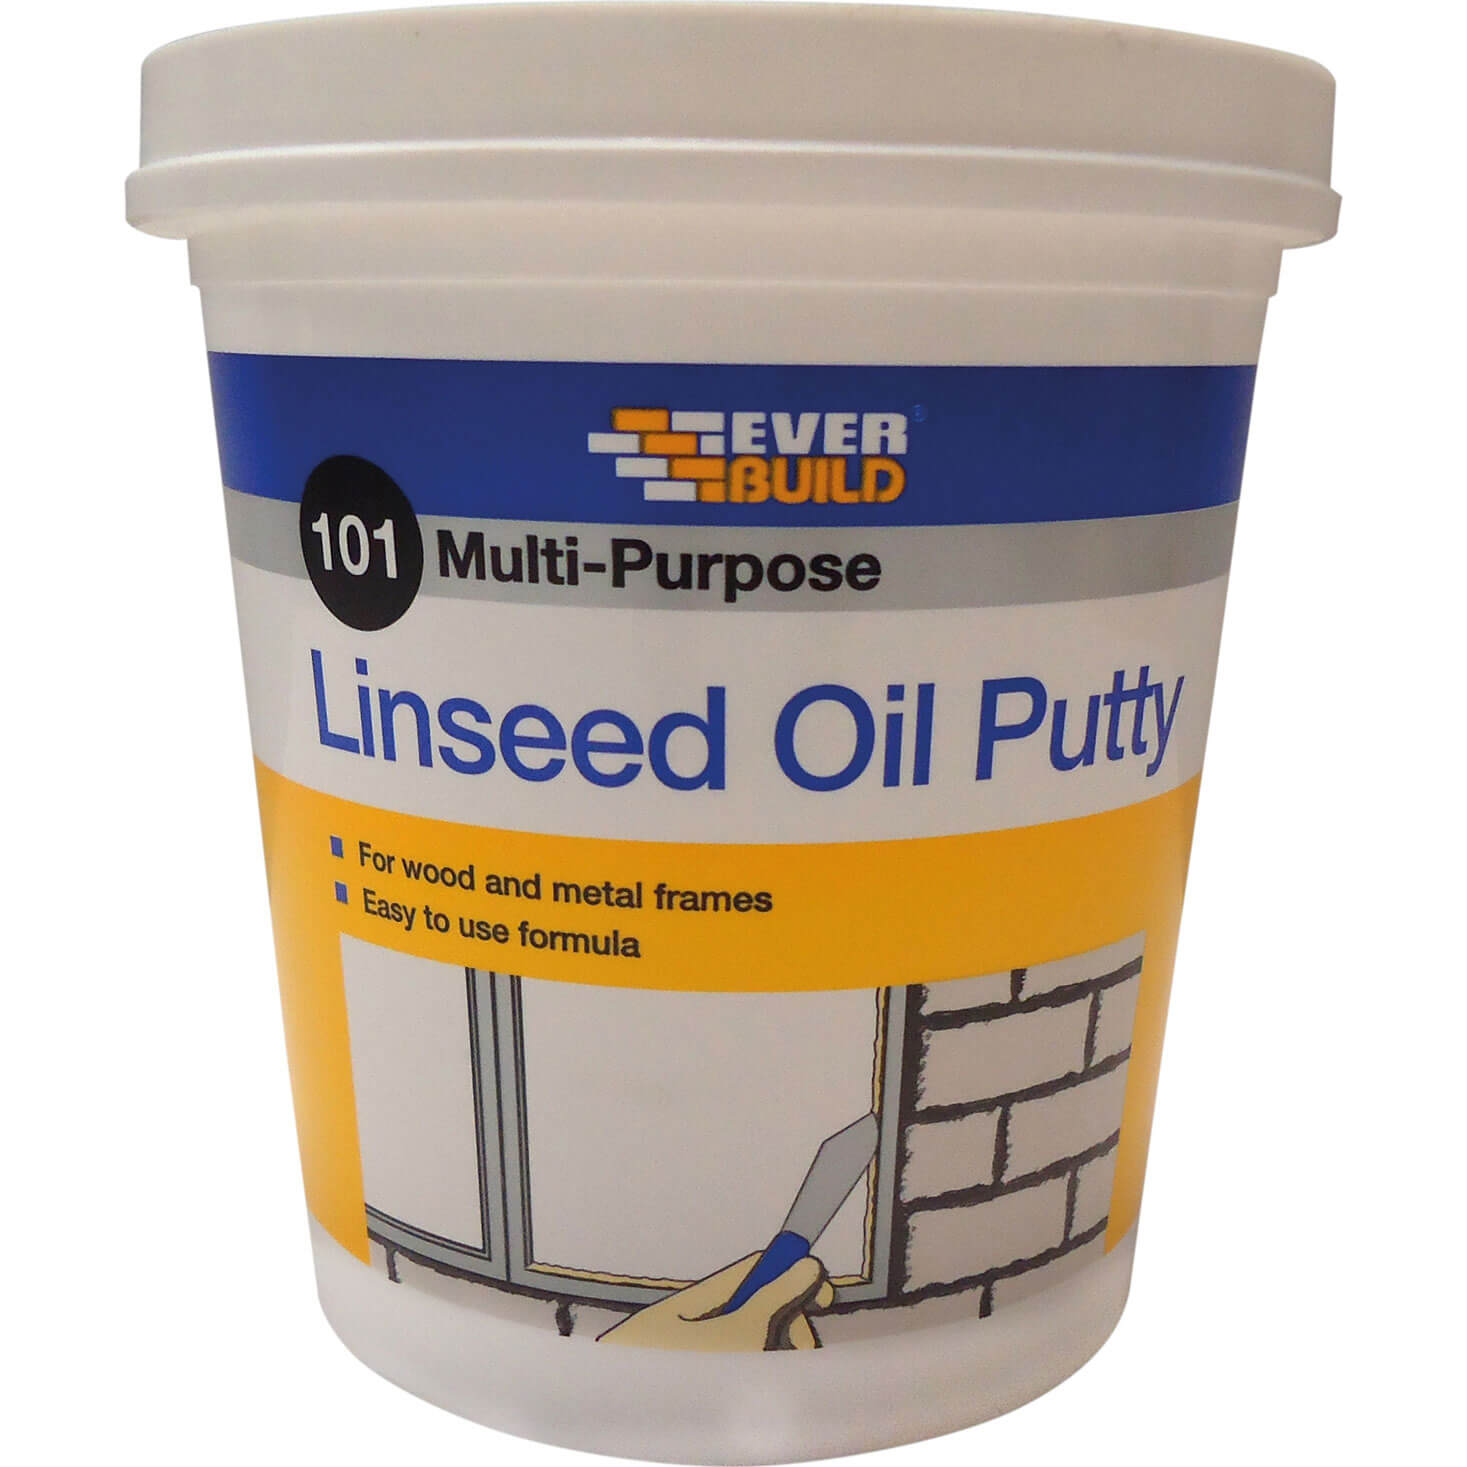 Photos - Sealant / Adhesive Everbuild Multi Purpose Linseed Oil Putty Natural 2000g EVBMPPN2KG 